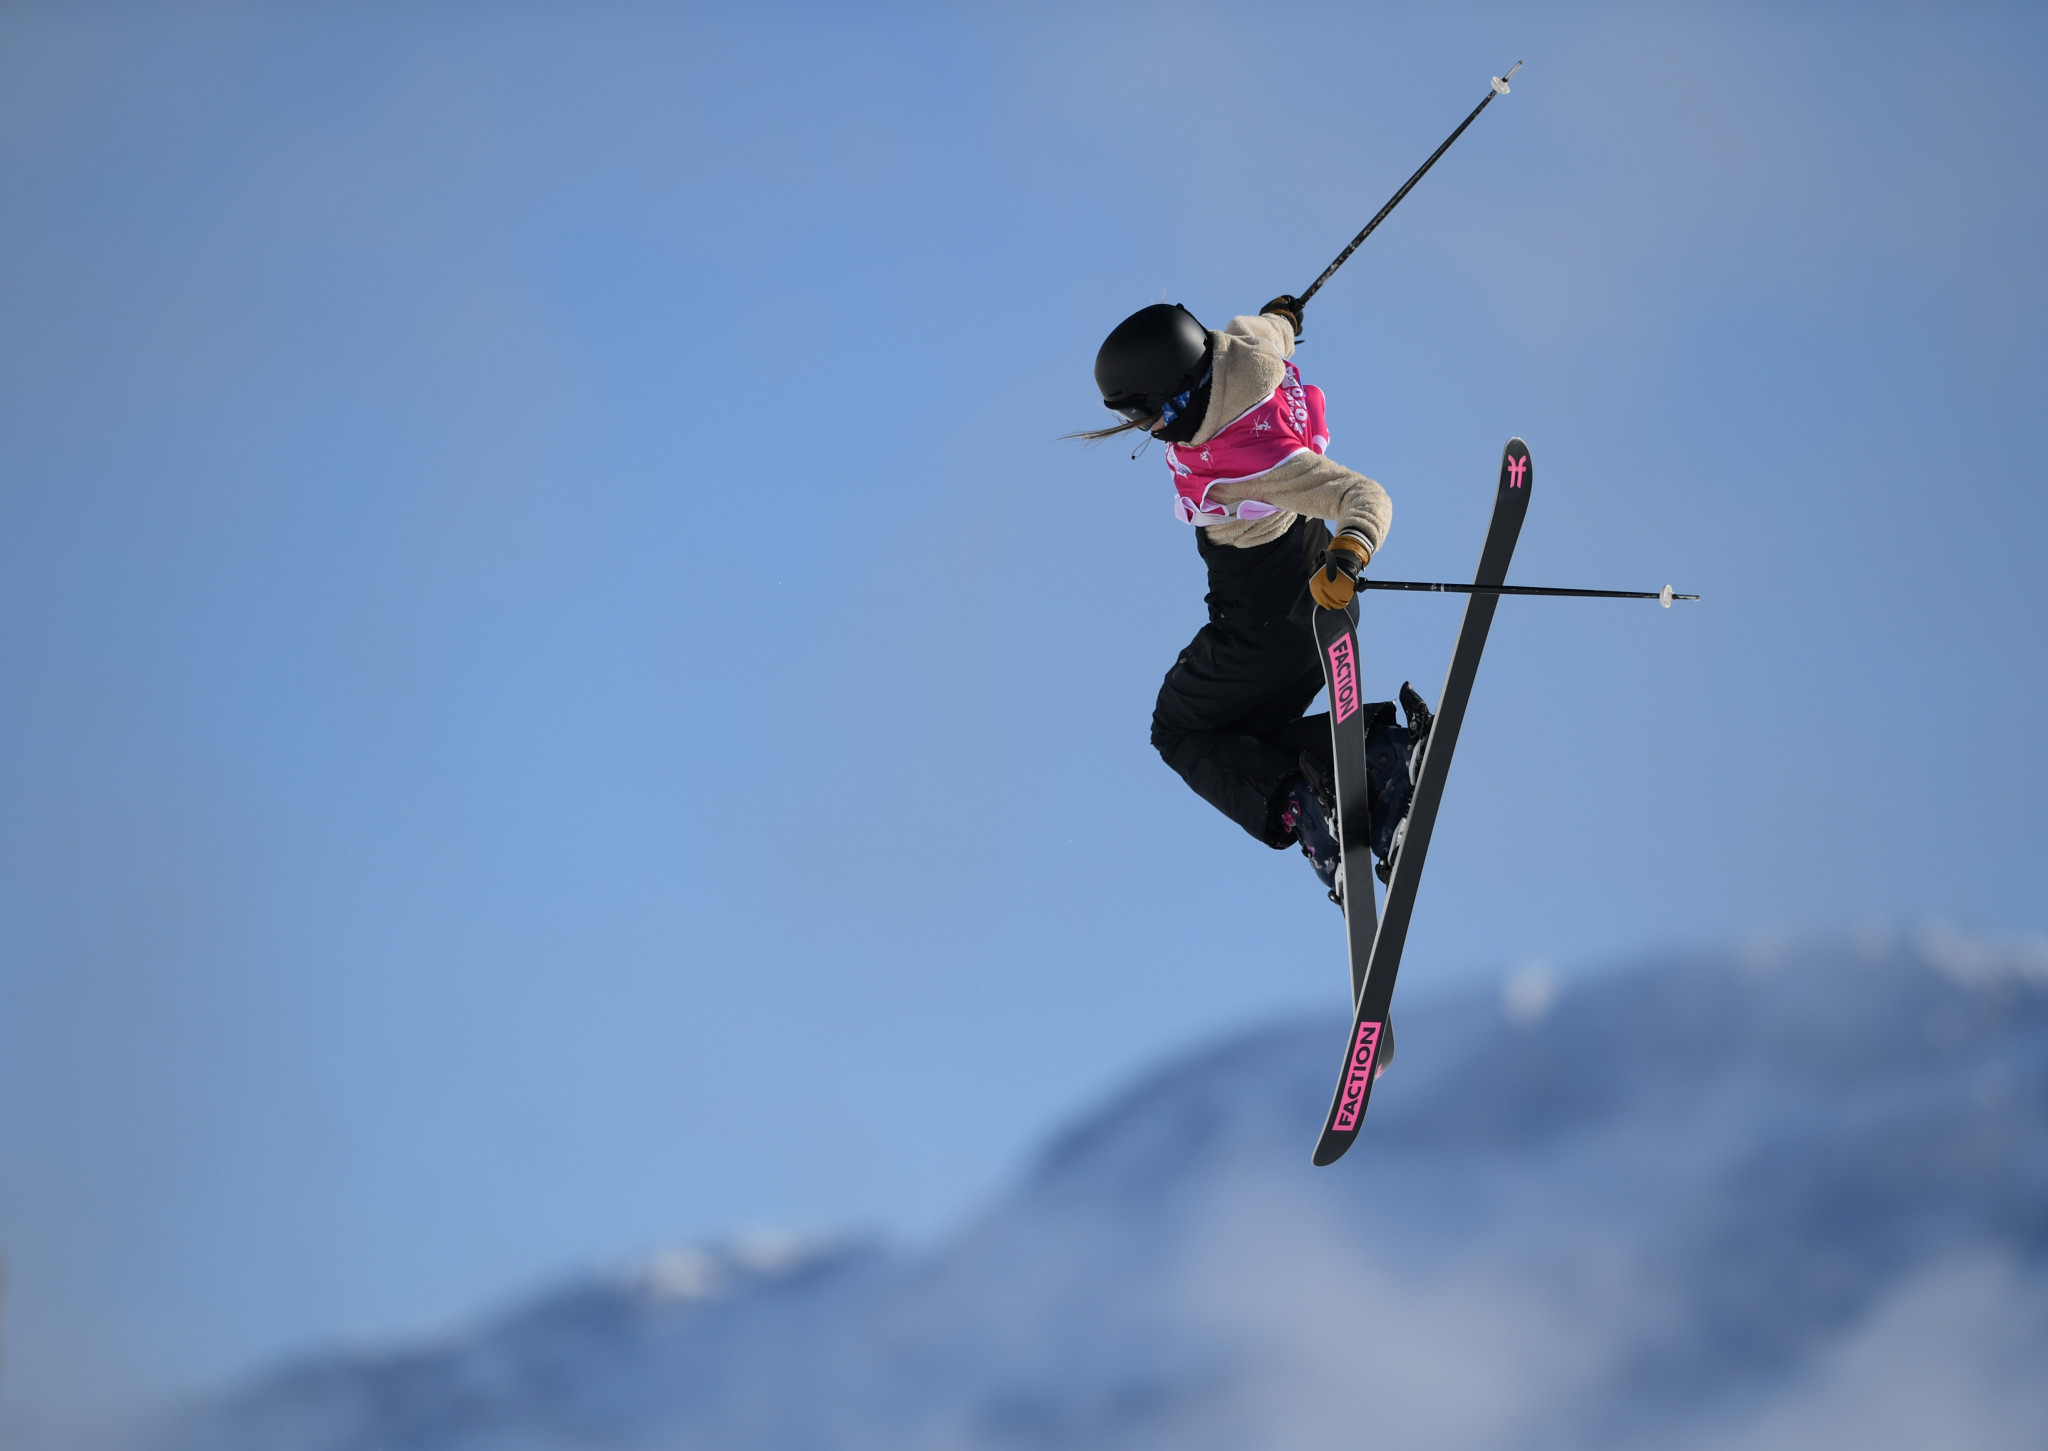 Kelly Sildaru triumphed in Aspen in the women's ski superpipe ©Getty Images